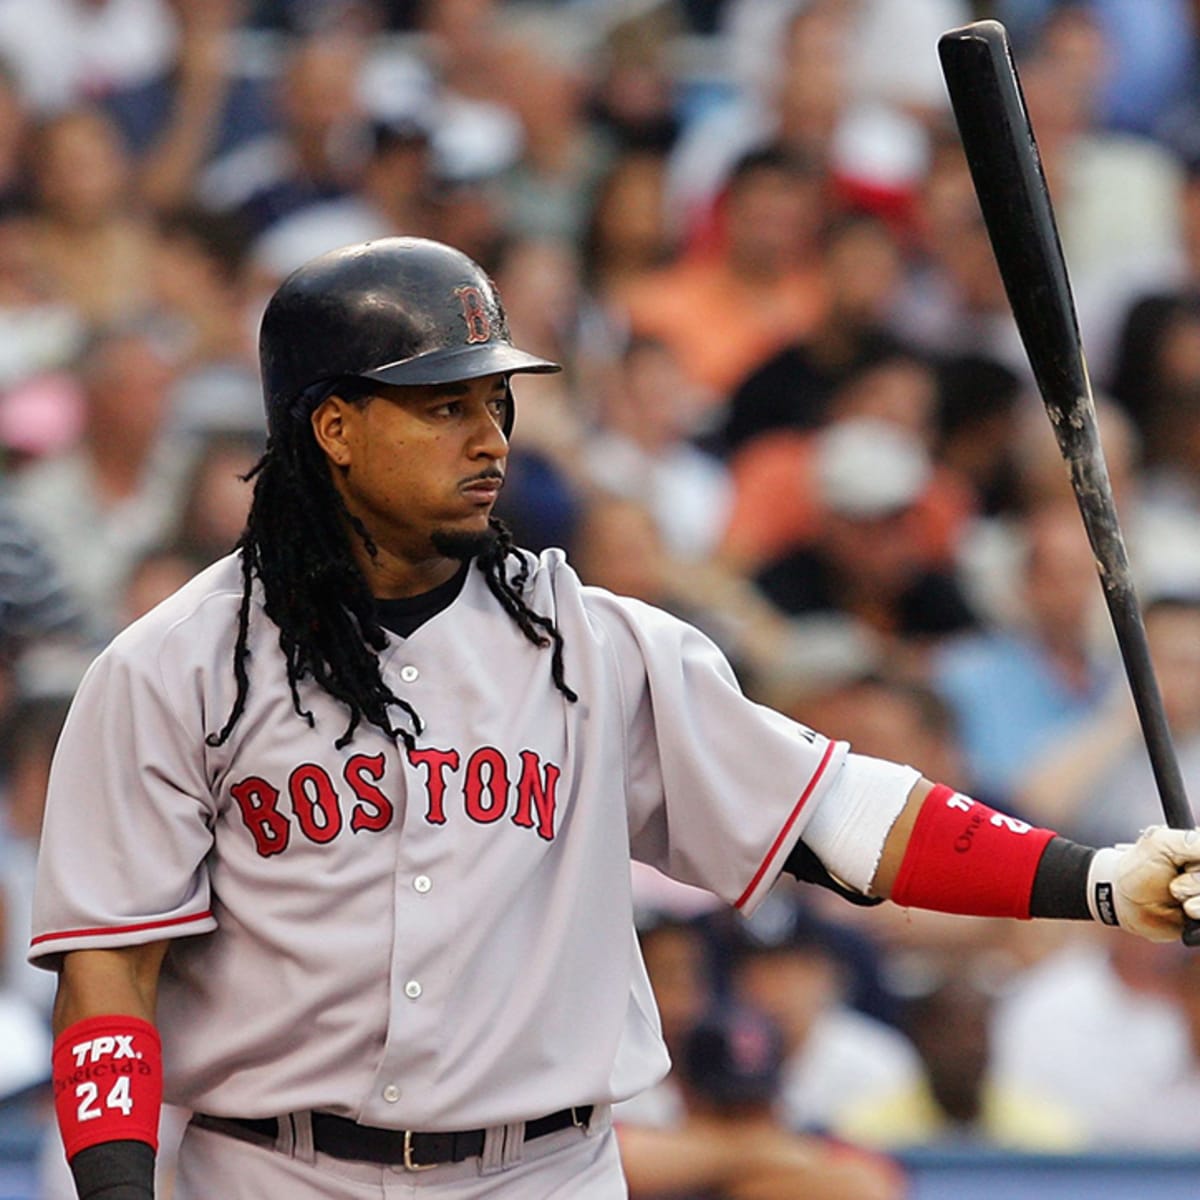 Manny Ramirez enters Guardians Hall of Fame, believes Cooperstown